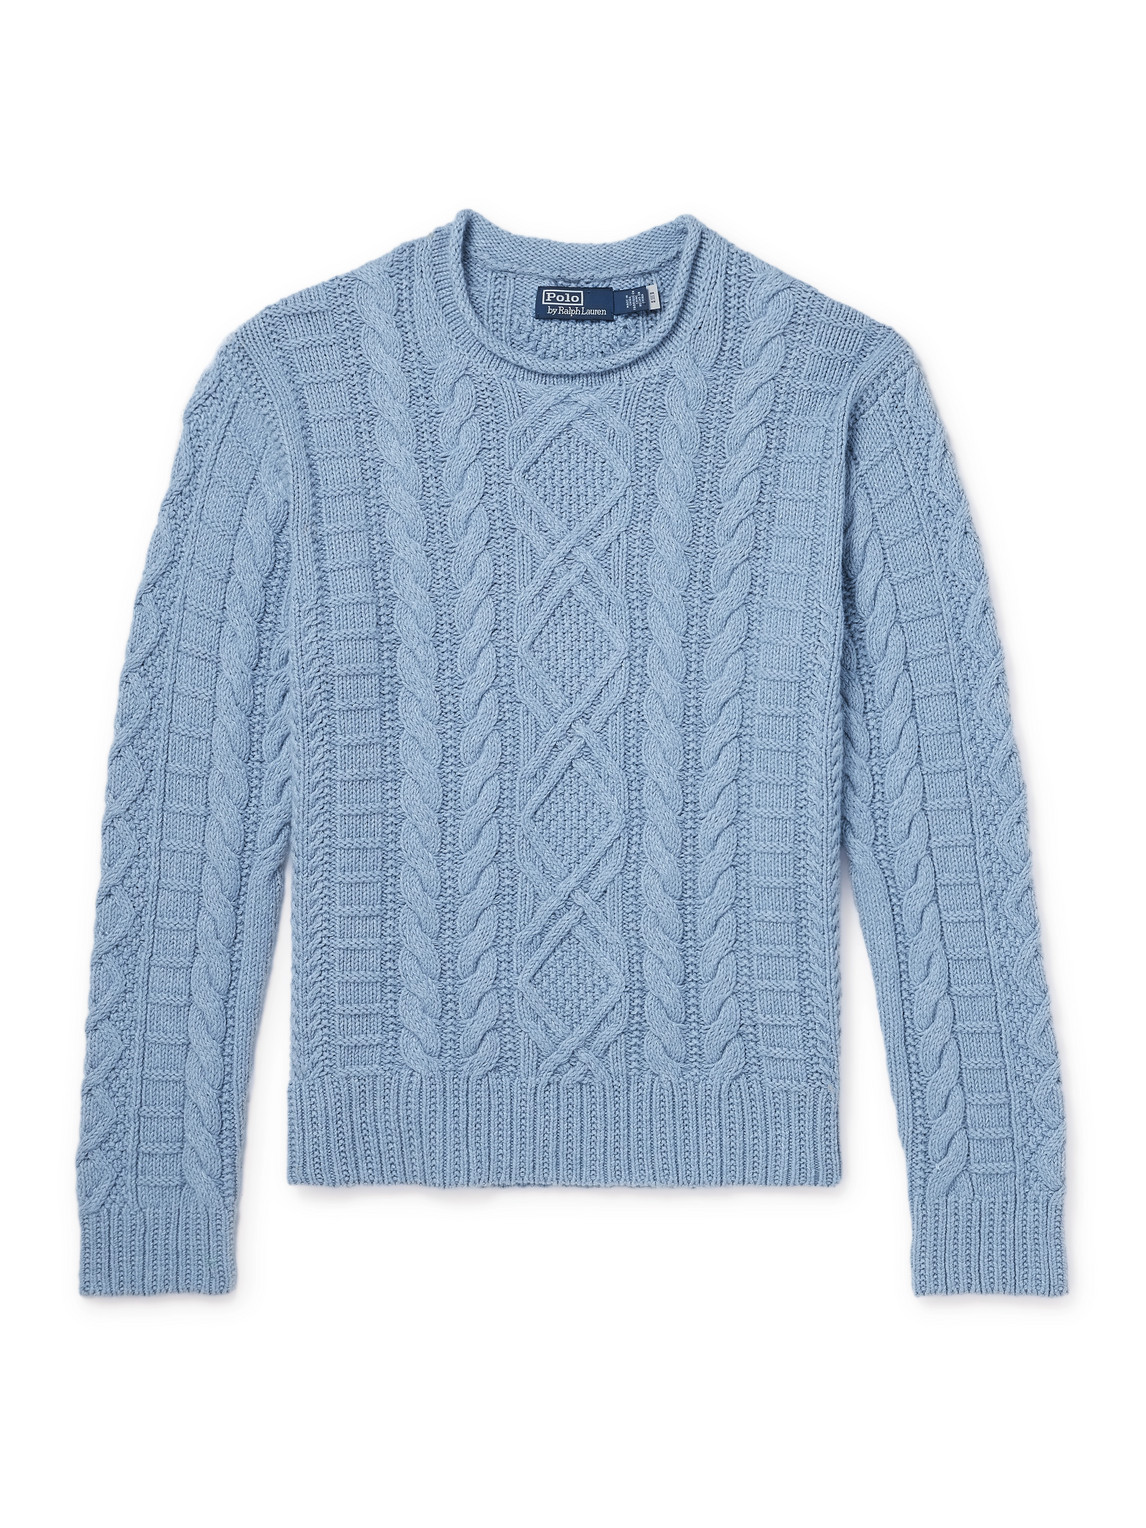 Polo Ralph Lauren Cable-knit Cotton, Cashmere And Linen-blend Jumper In Blue